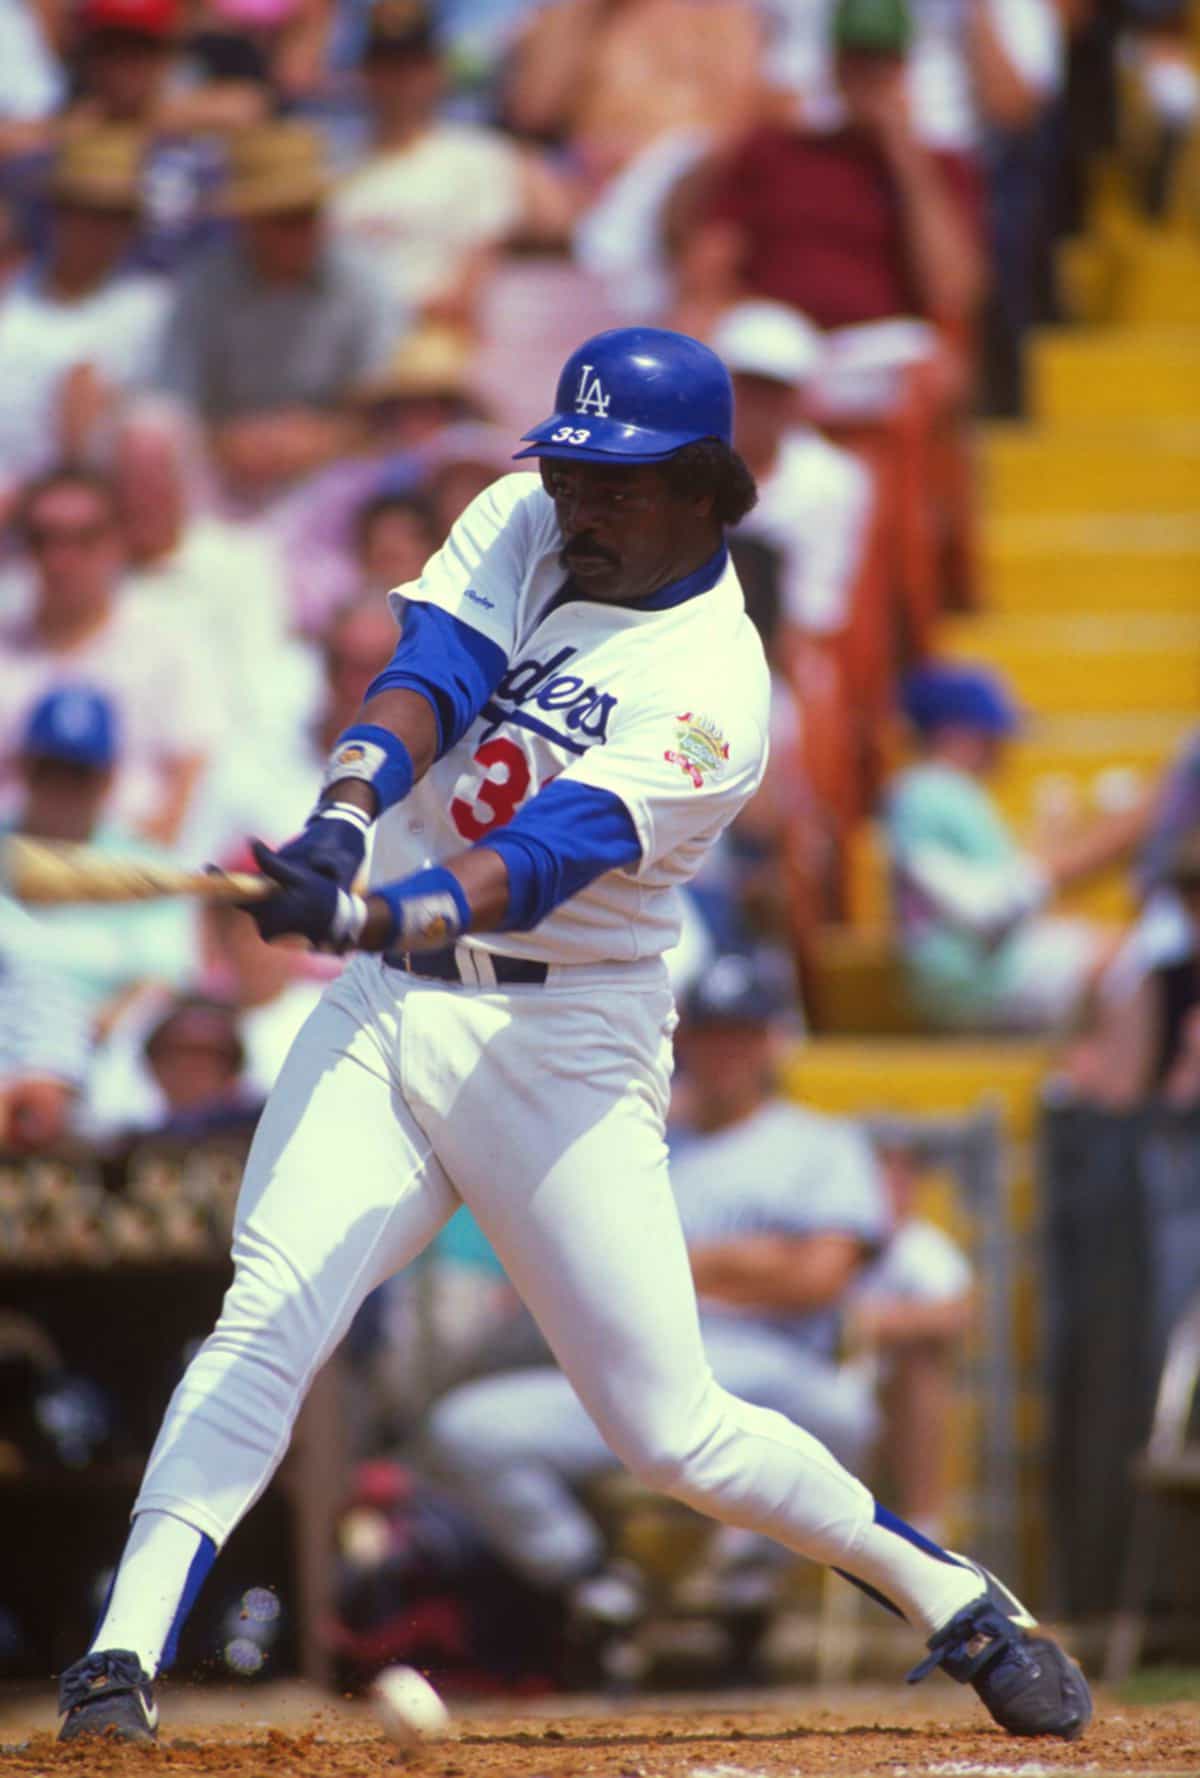 Dodgers first baseman Eddie Murray led the major leagues in batting average in 1990, hitting .330, but did not win a batting title.